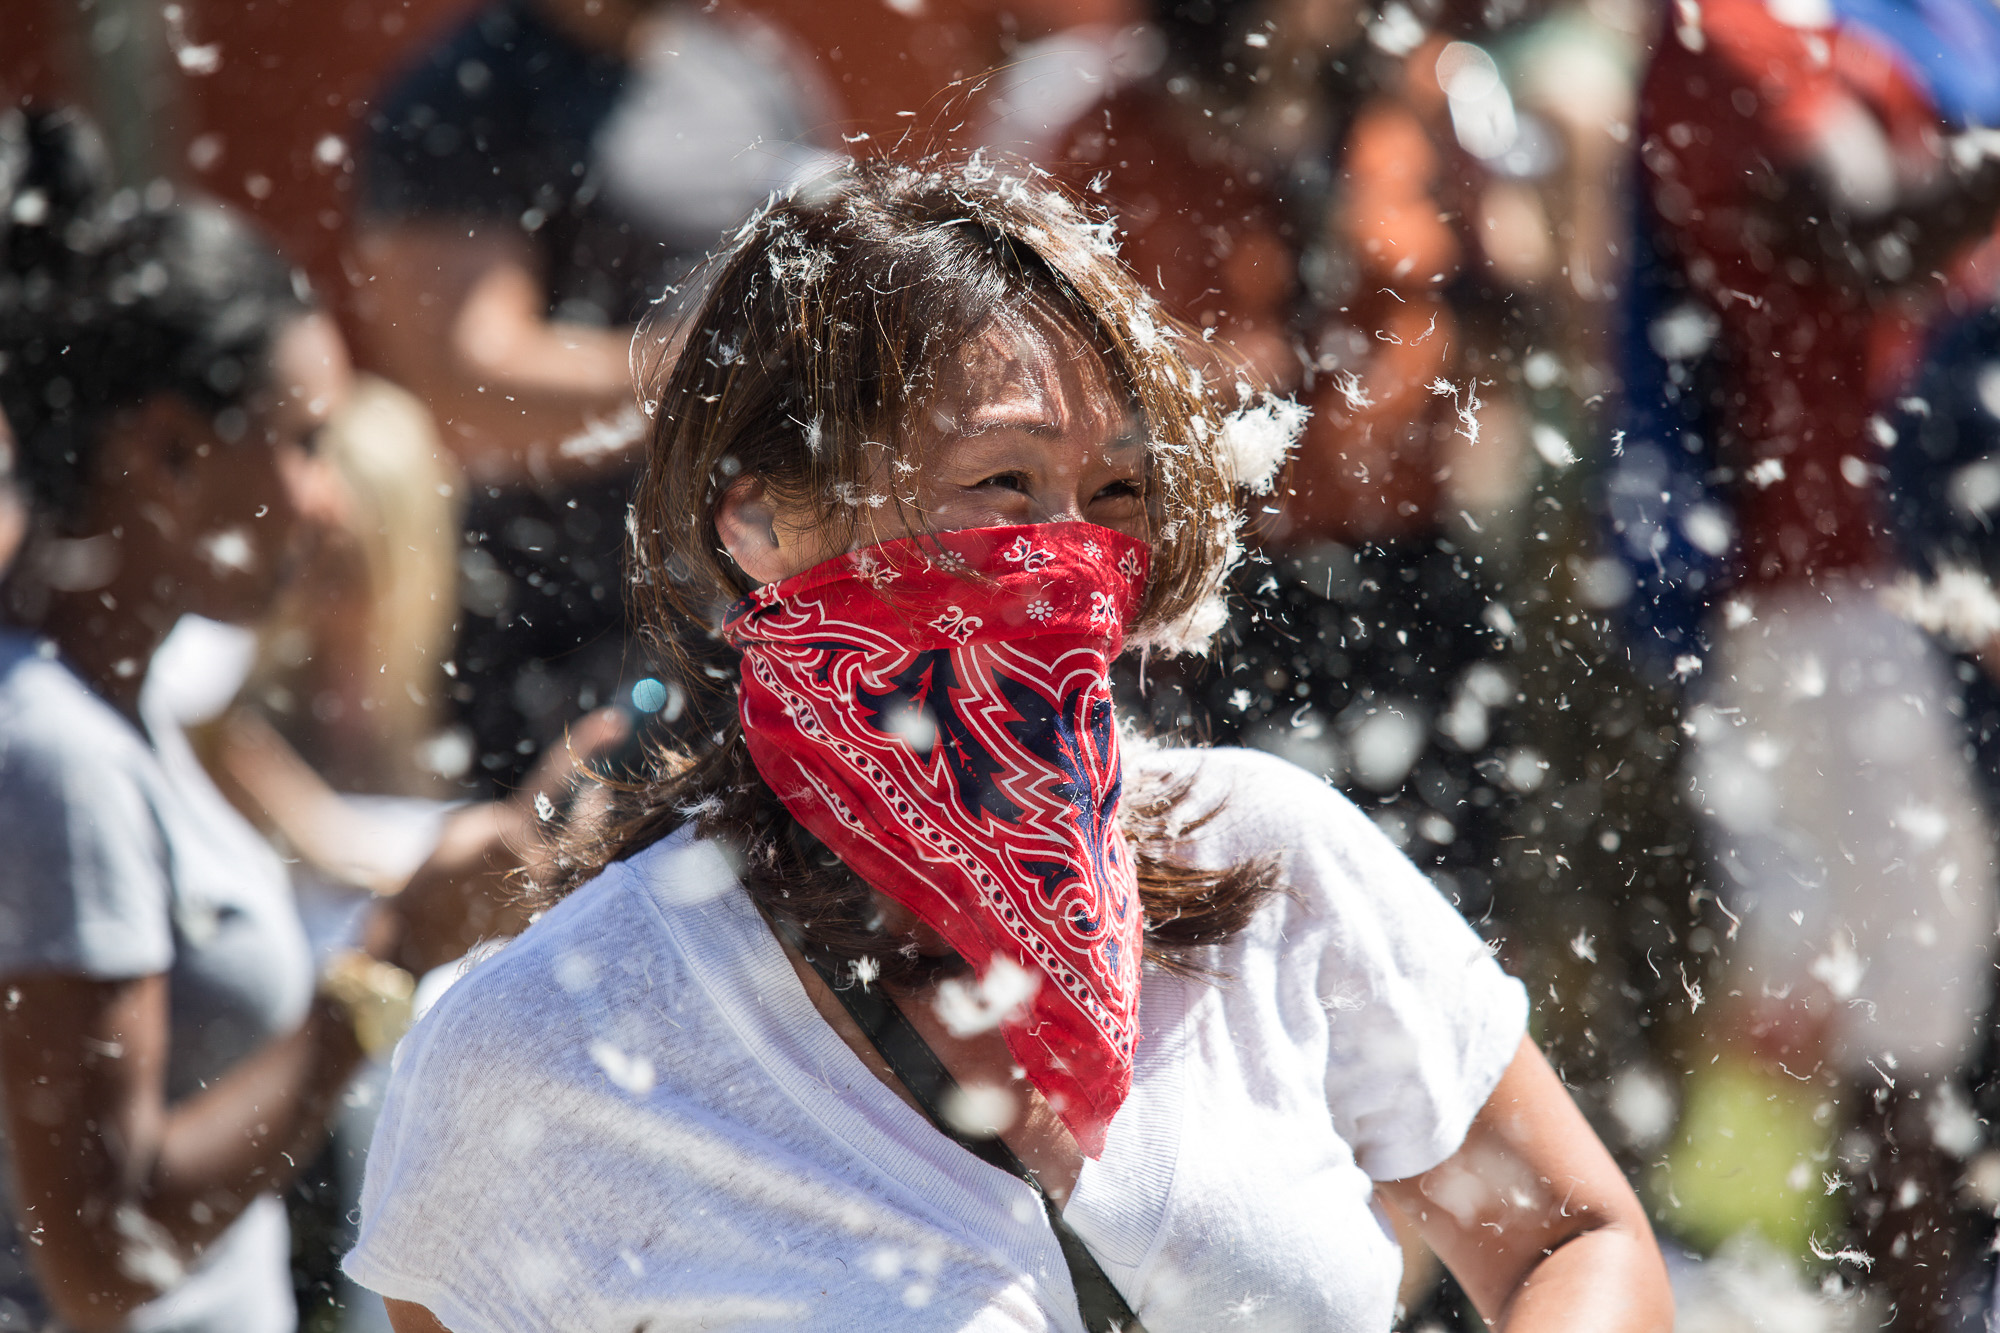  LA local Kris Chen enjoys and takes part in the annual International Pillow Fight Day fight in Pershing Square in Downtown Los Angles on Saturday, April 1 2017. Hundreds of people traded soft blows in a giant pillow fight that dwarfed even the bigge